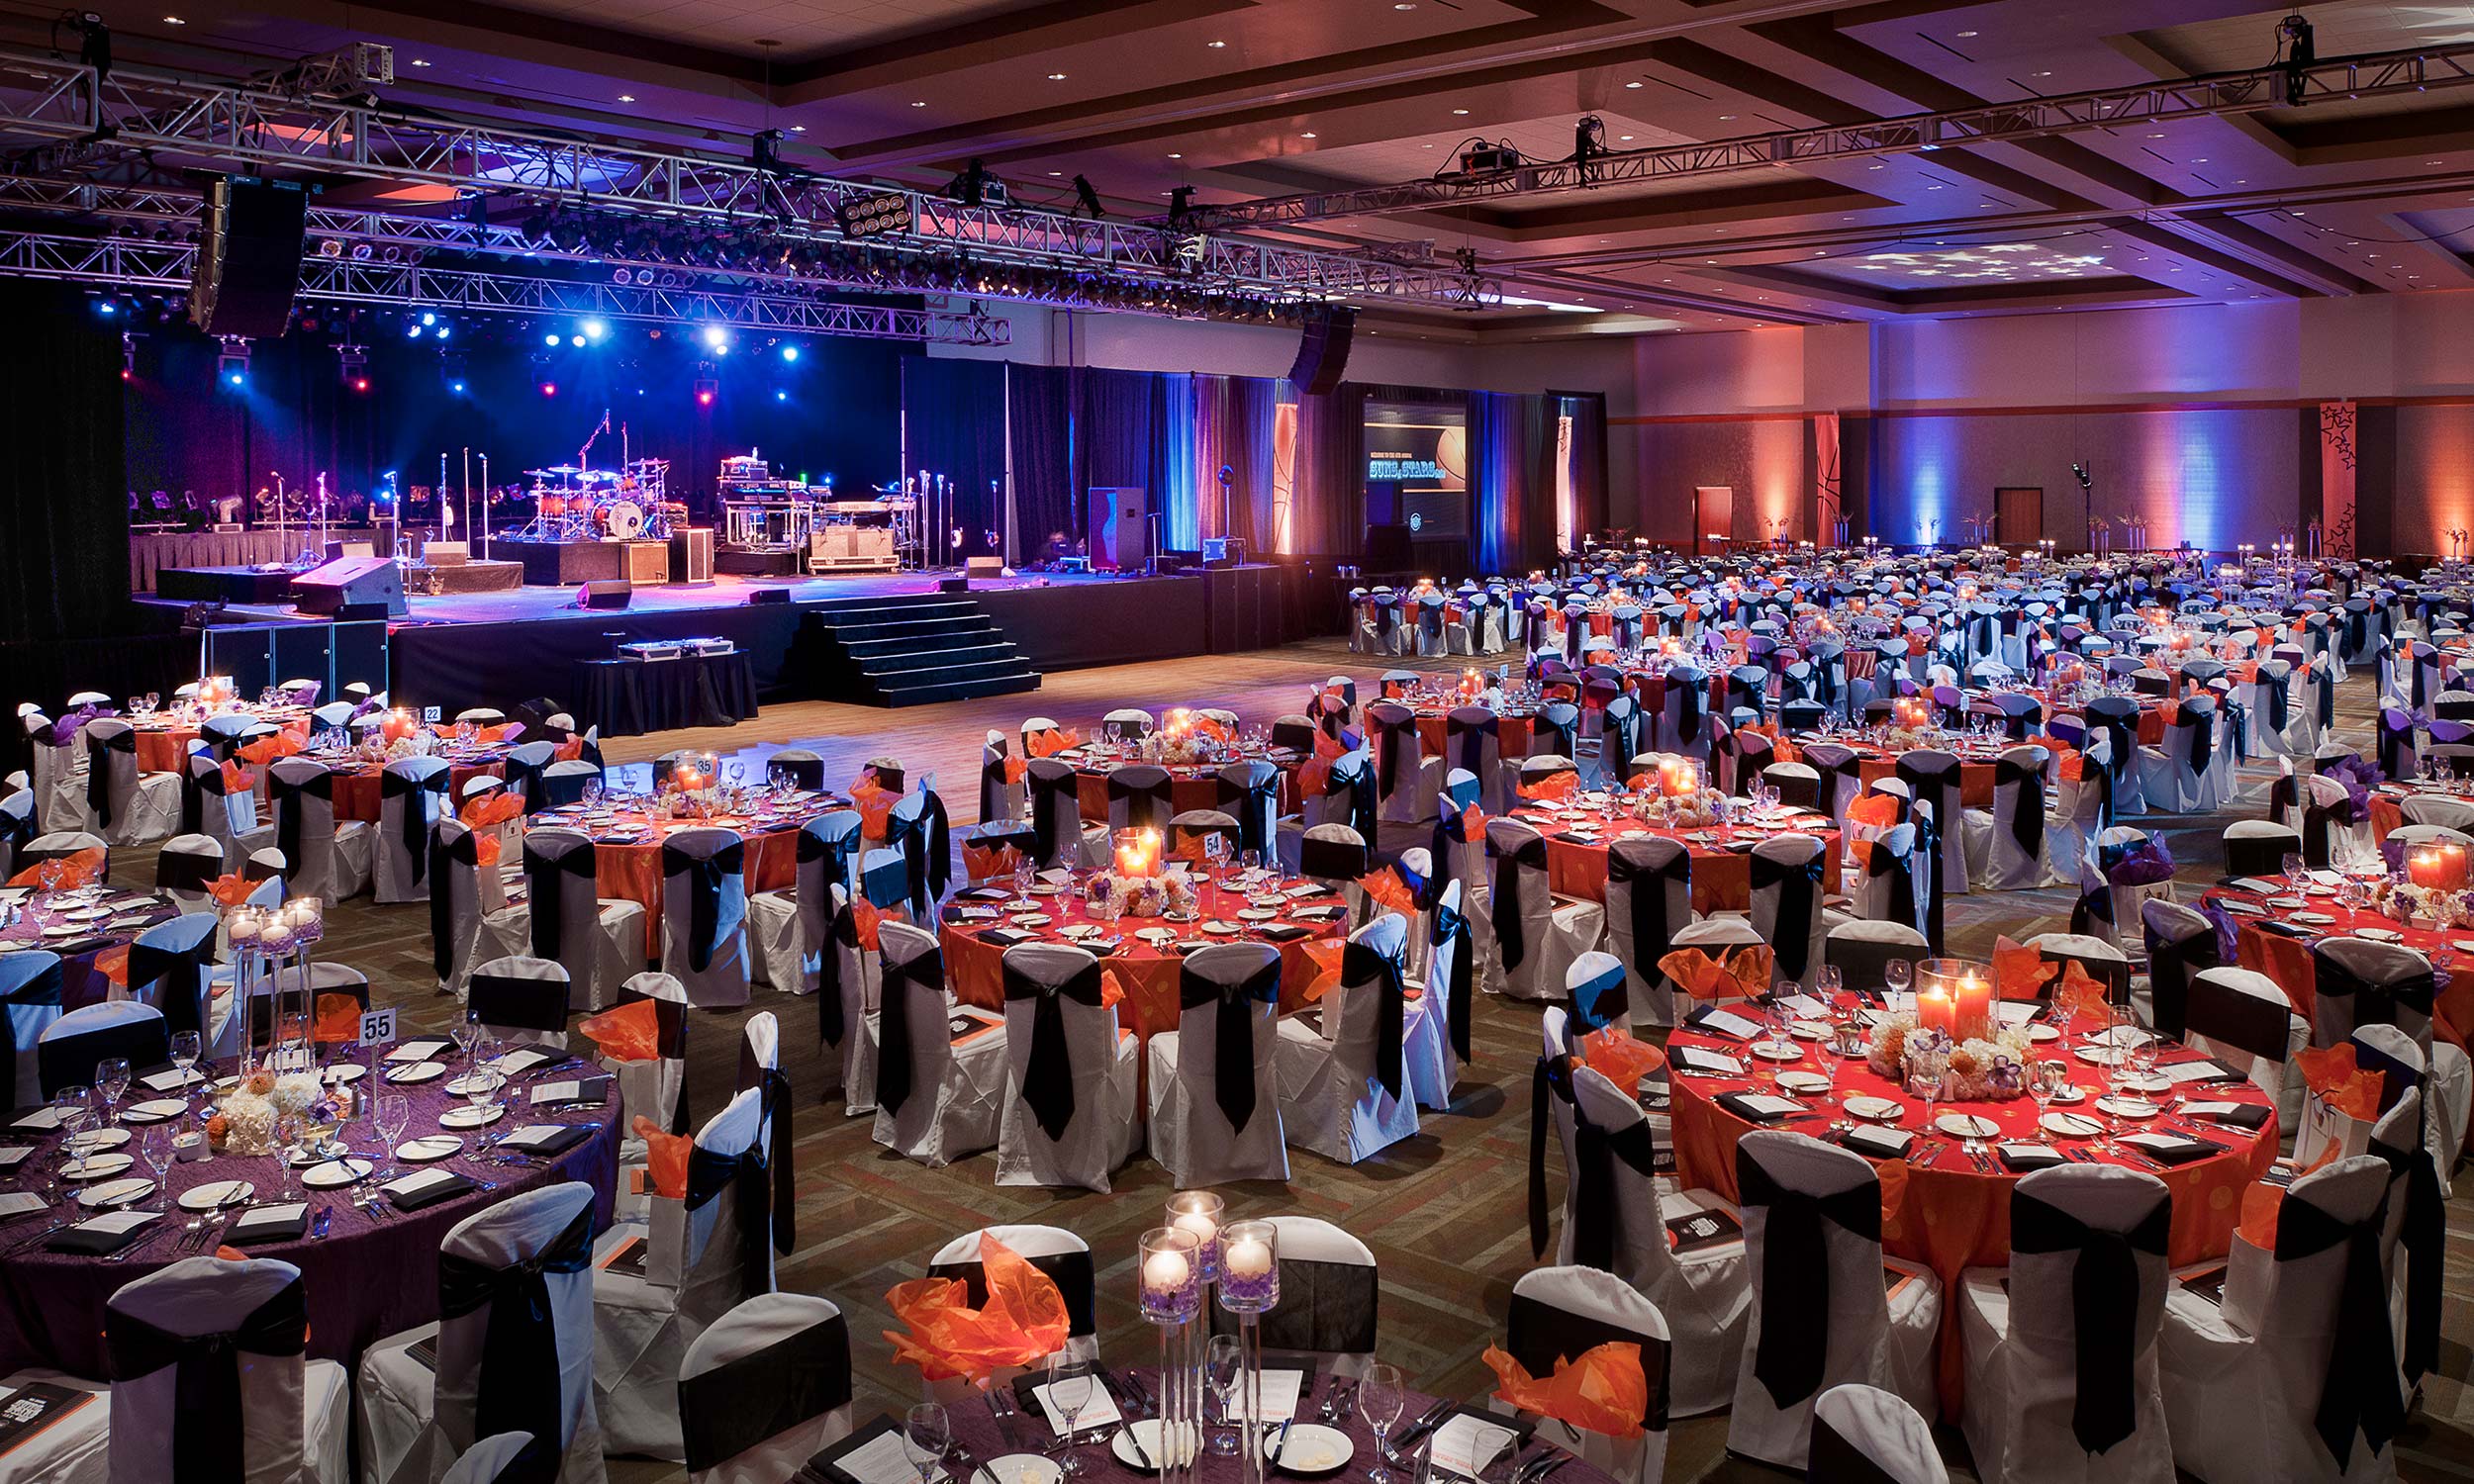 The Salt River Grand Ballroom at Talking Stick Resort. Round tables are arranged in front of a large stage.